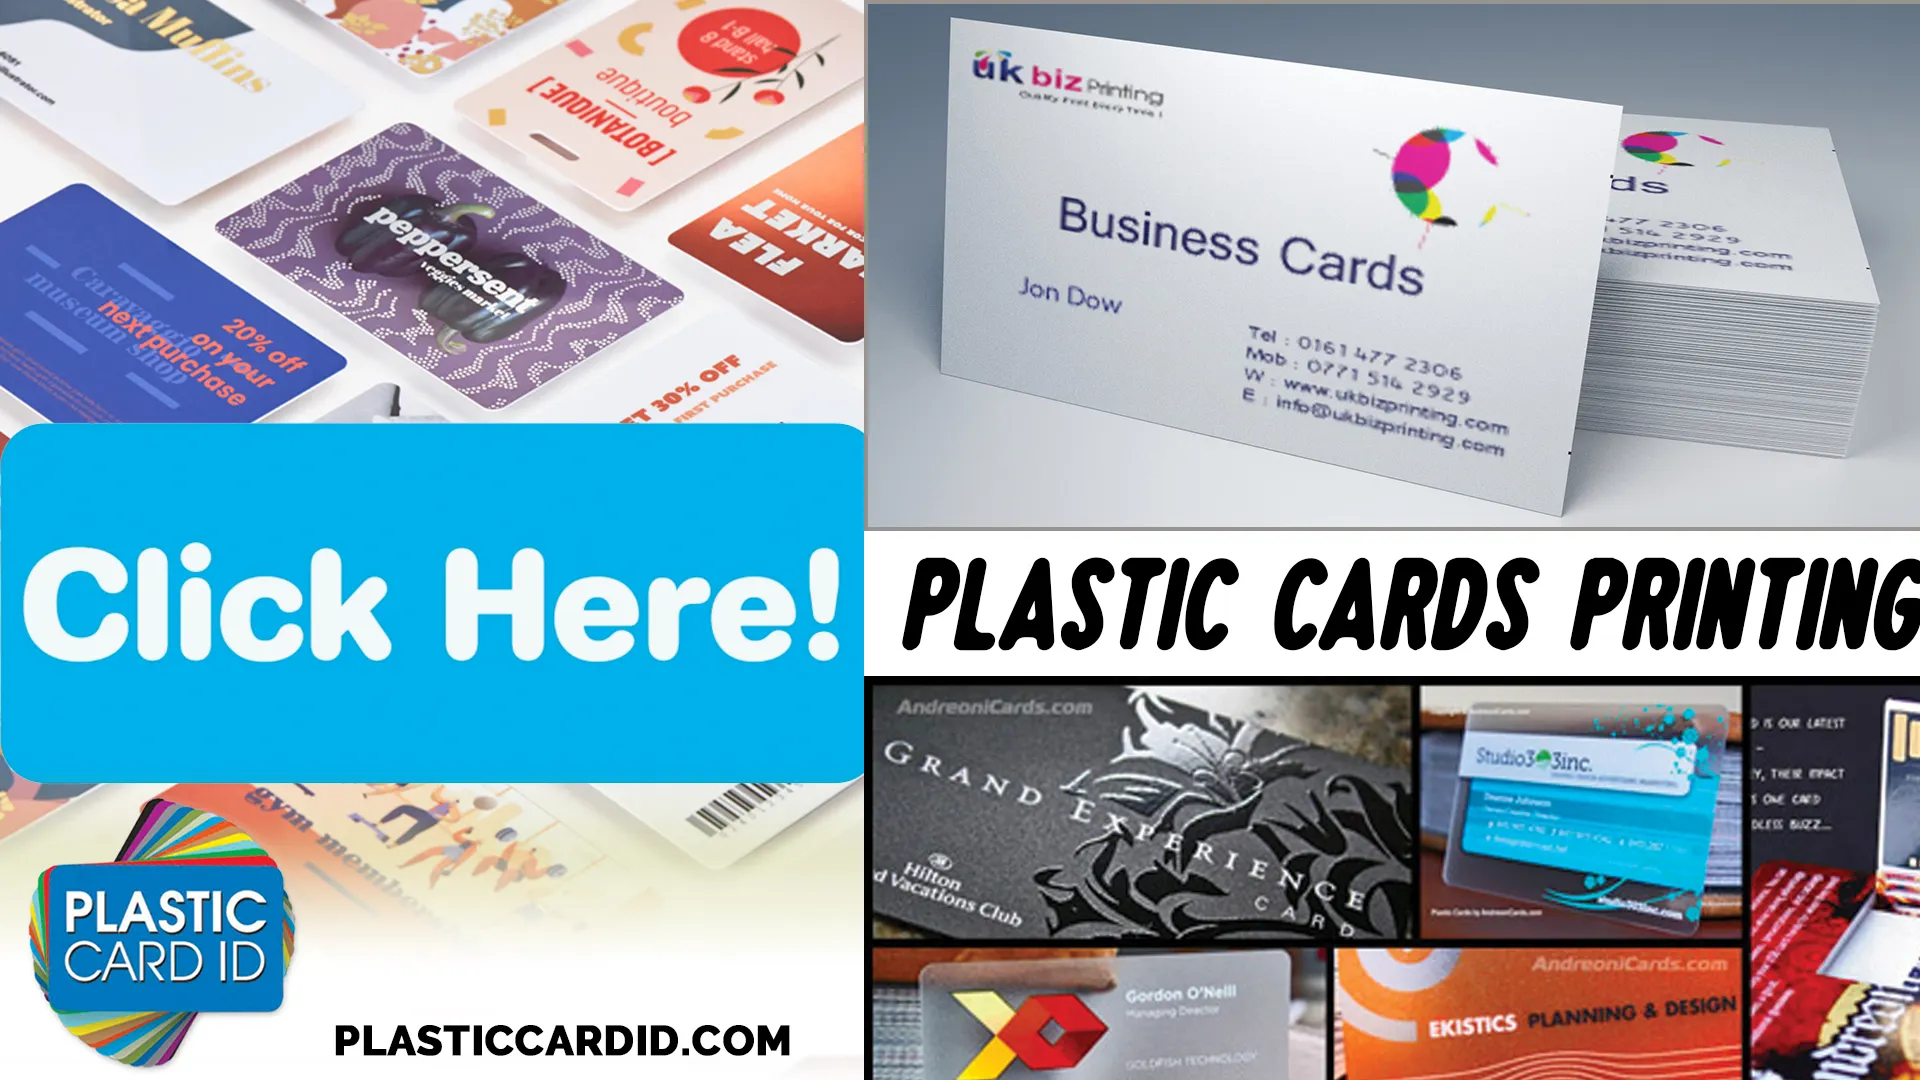 Industry-Leading Expertise at Plastic Card ID
